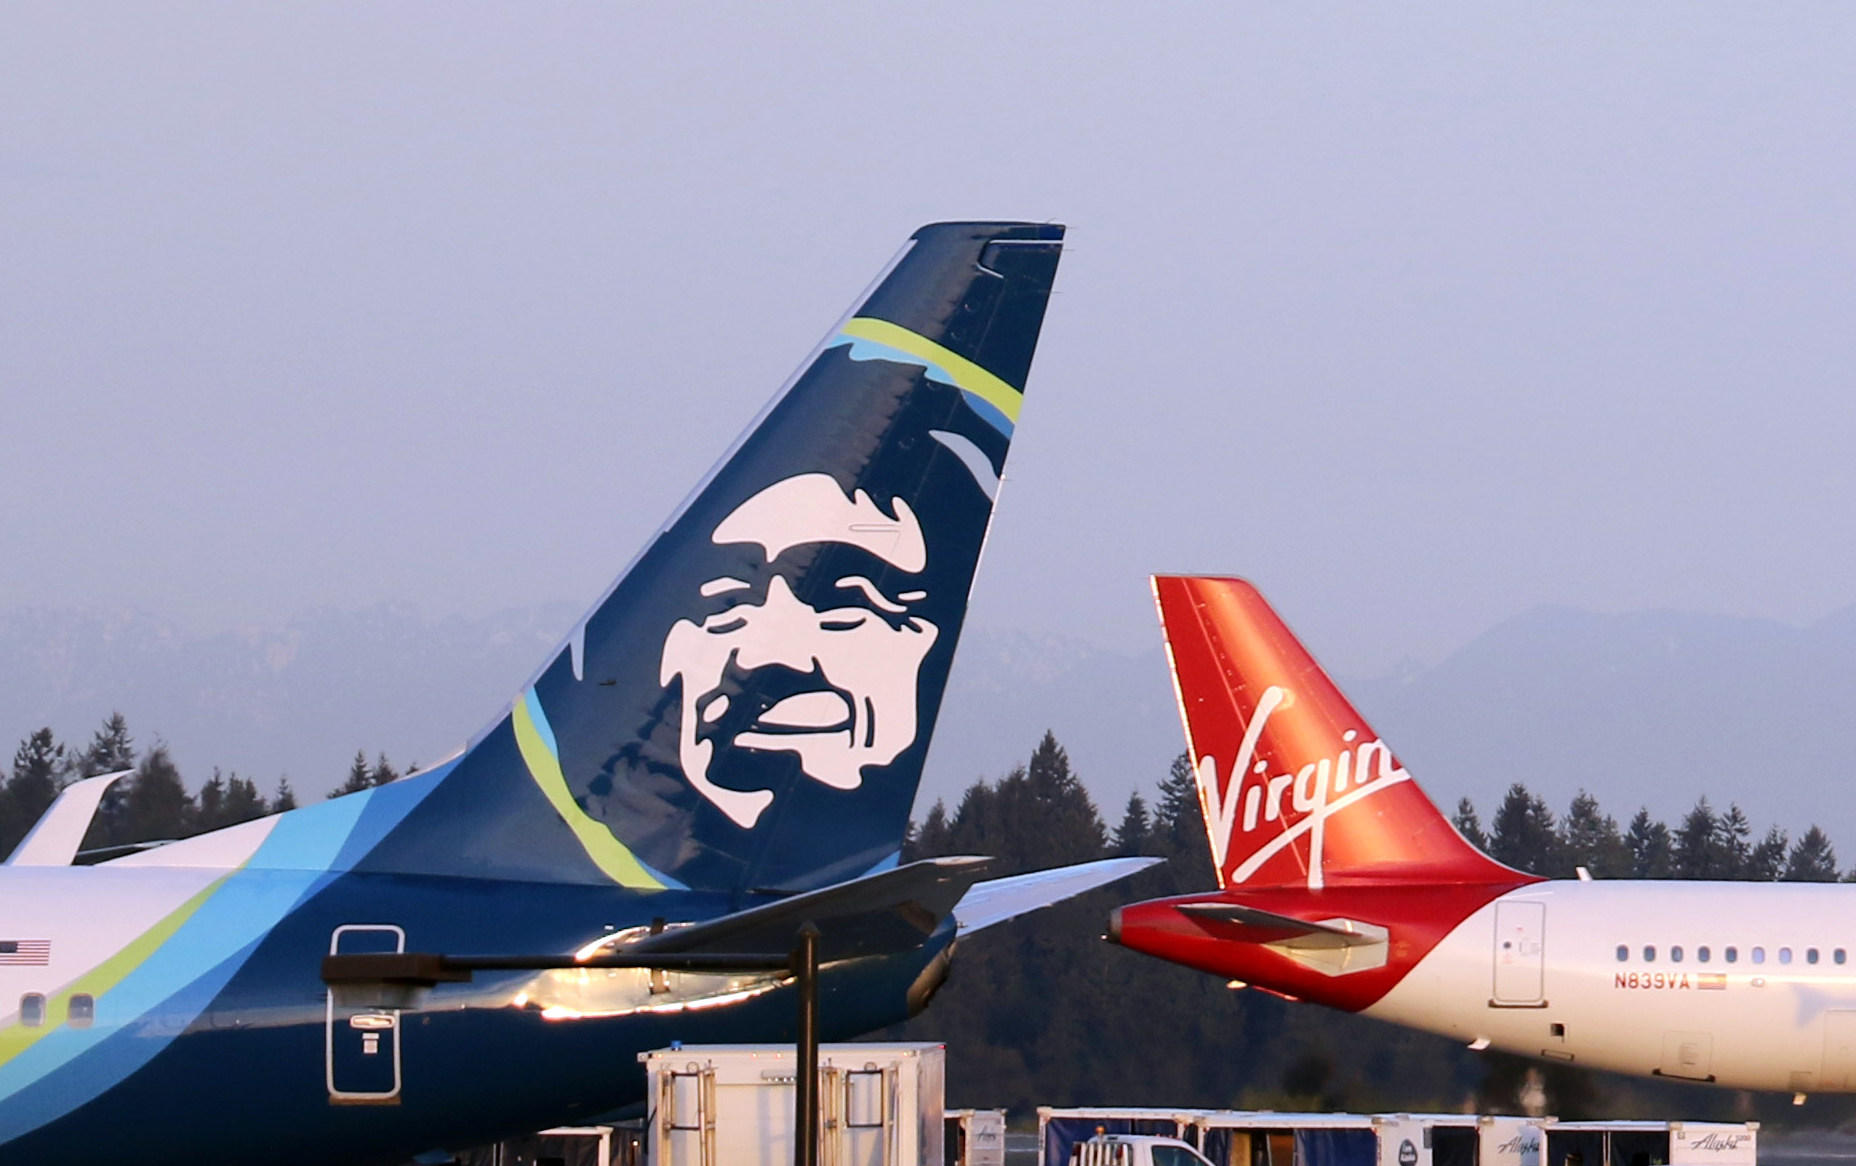 COURTESY OF ALASKA AIRLINES